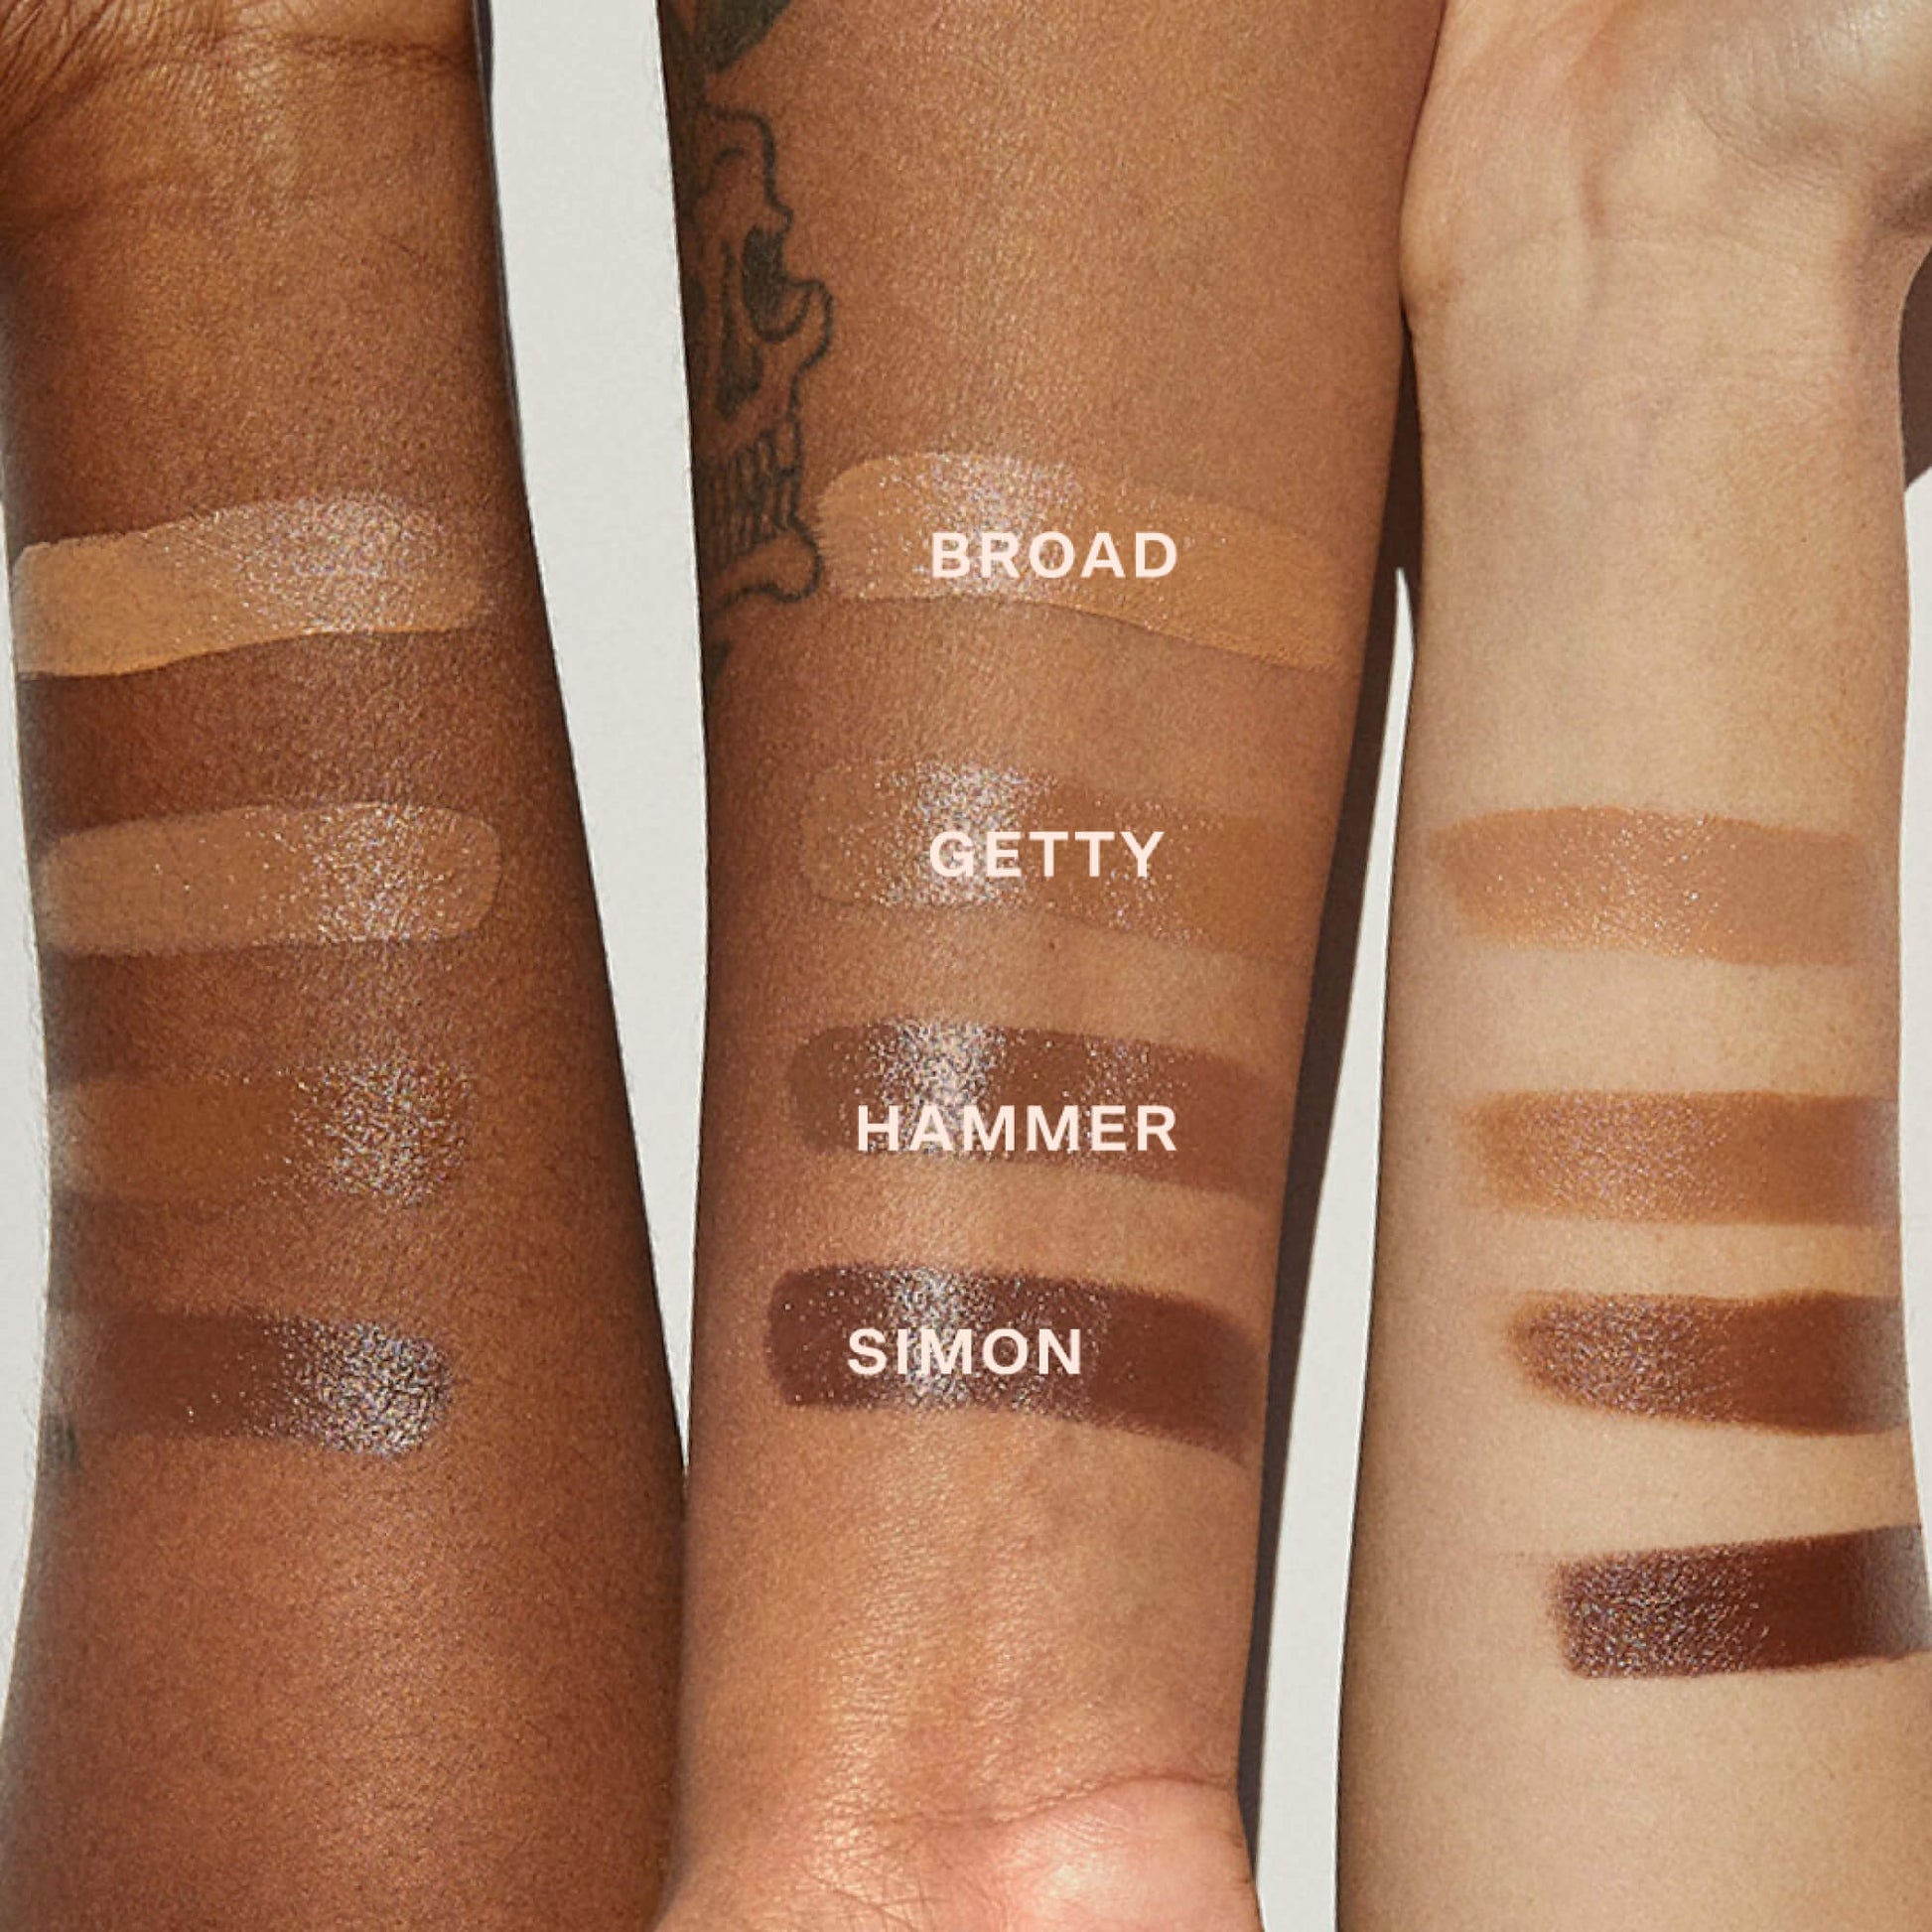 [Shared: All four shades of the Tower 28 Beauty Sculptino™ Cream Contour swatched on three different skin tones